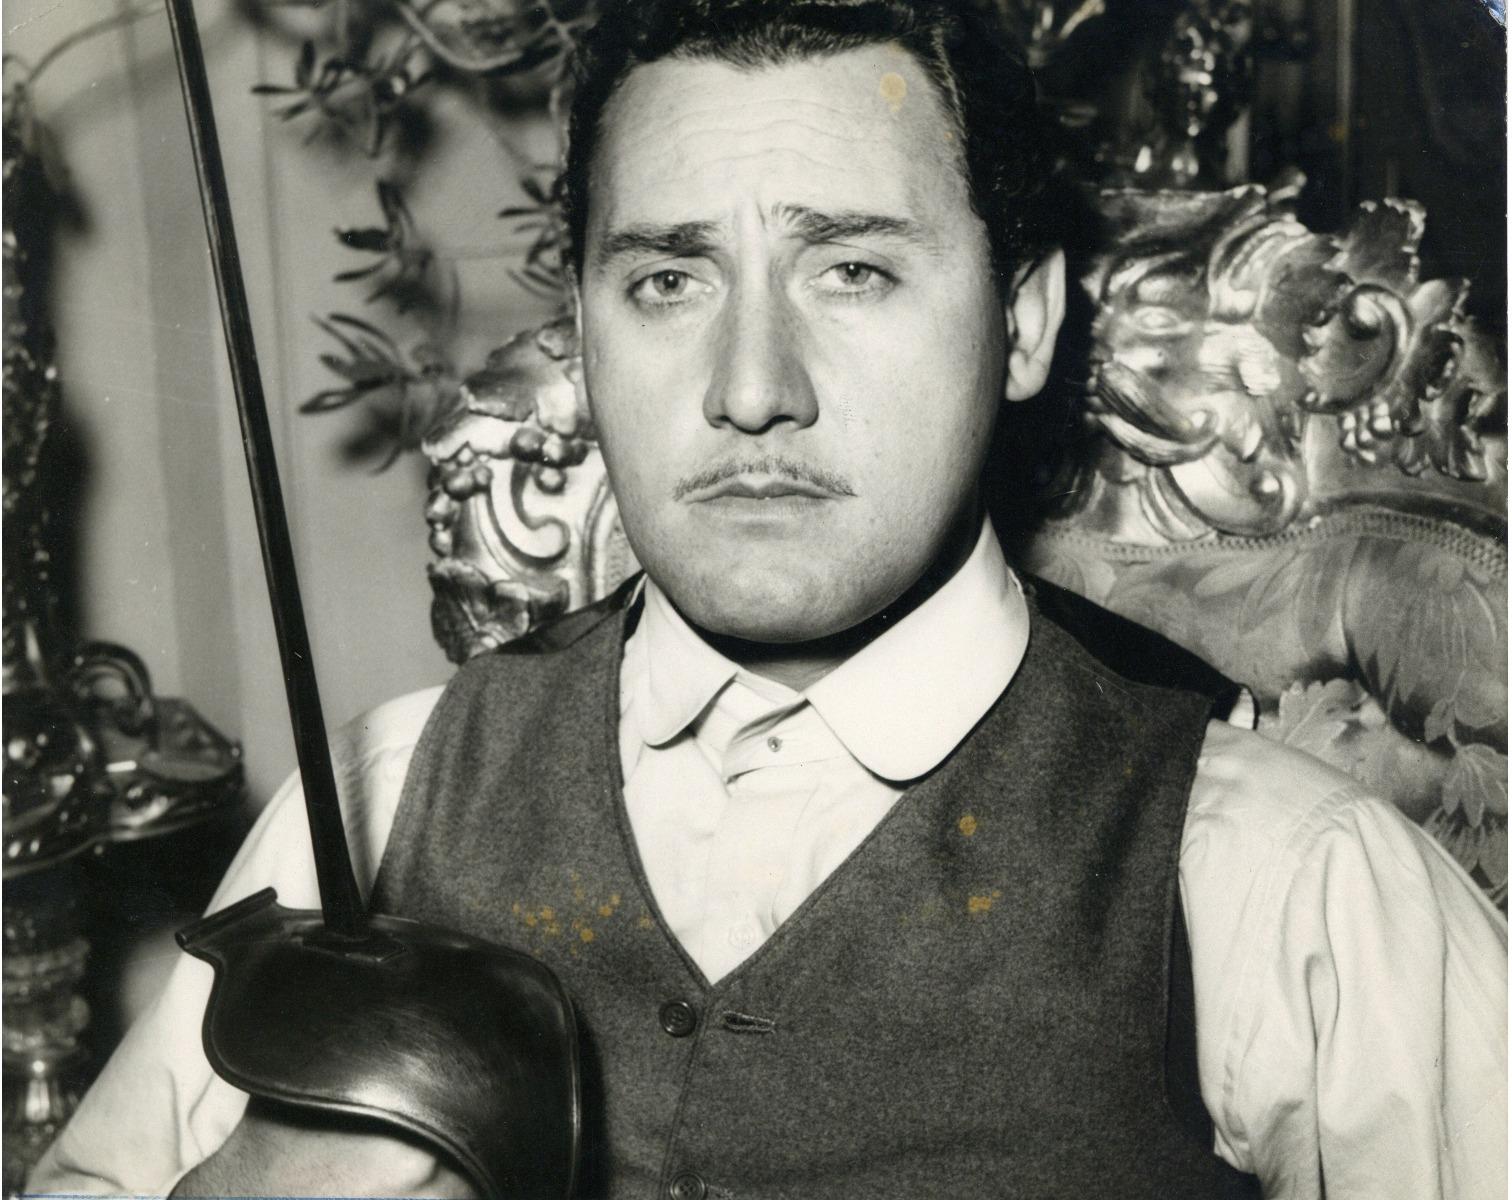 One Hundred Years of Alberto Sordi # 12 is a vintage photographic print on single-coated paper.

Photograph realized by Italian famous Photographer Pierluigi Praturlon ( Pierluigi).

Artist's ink stamp and notes on the back

Original print from end